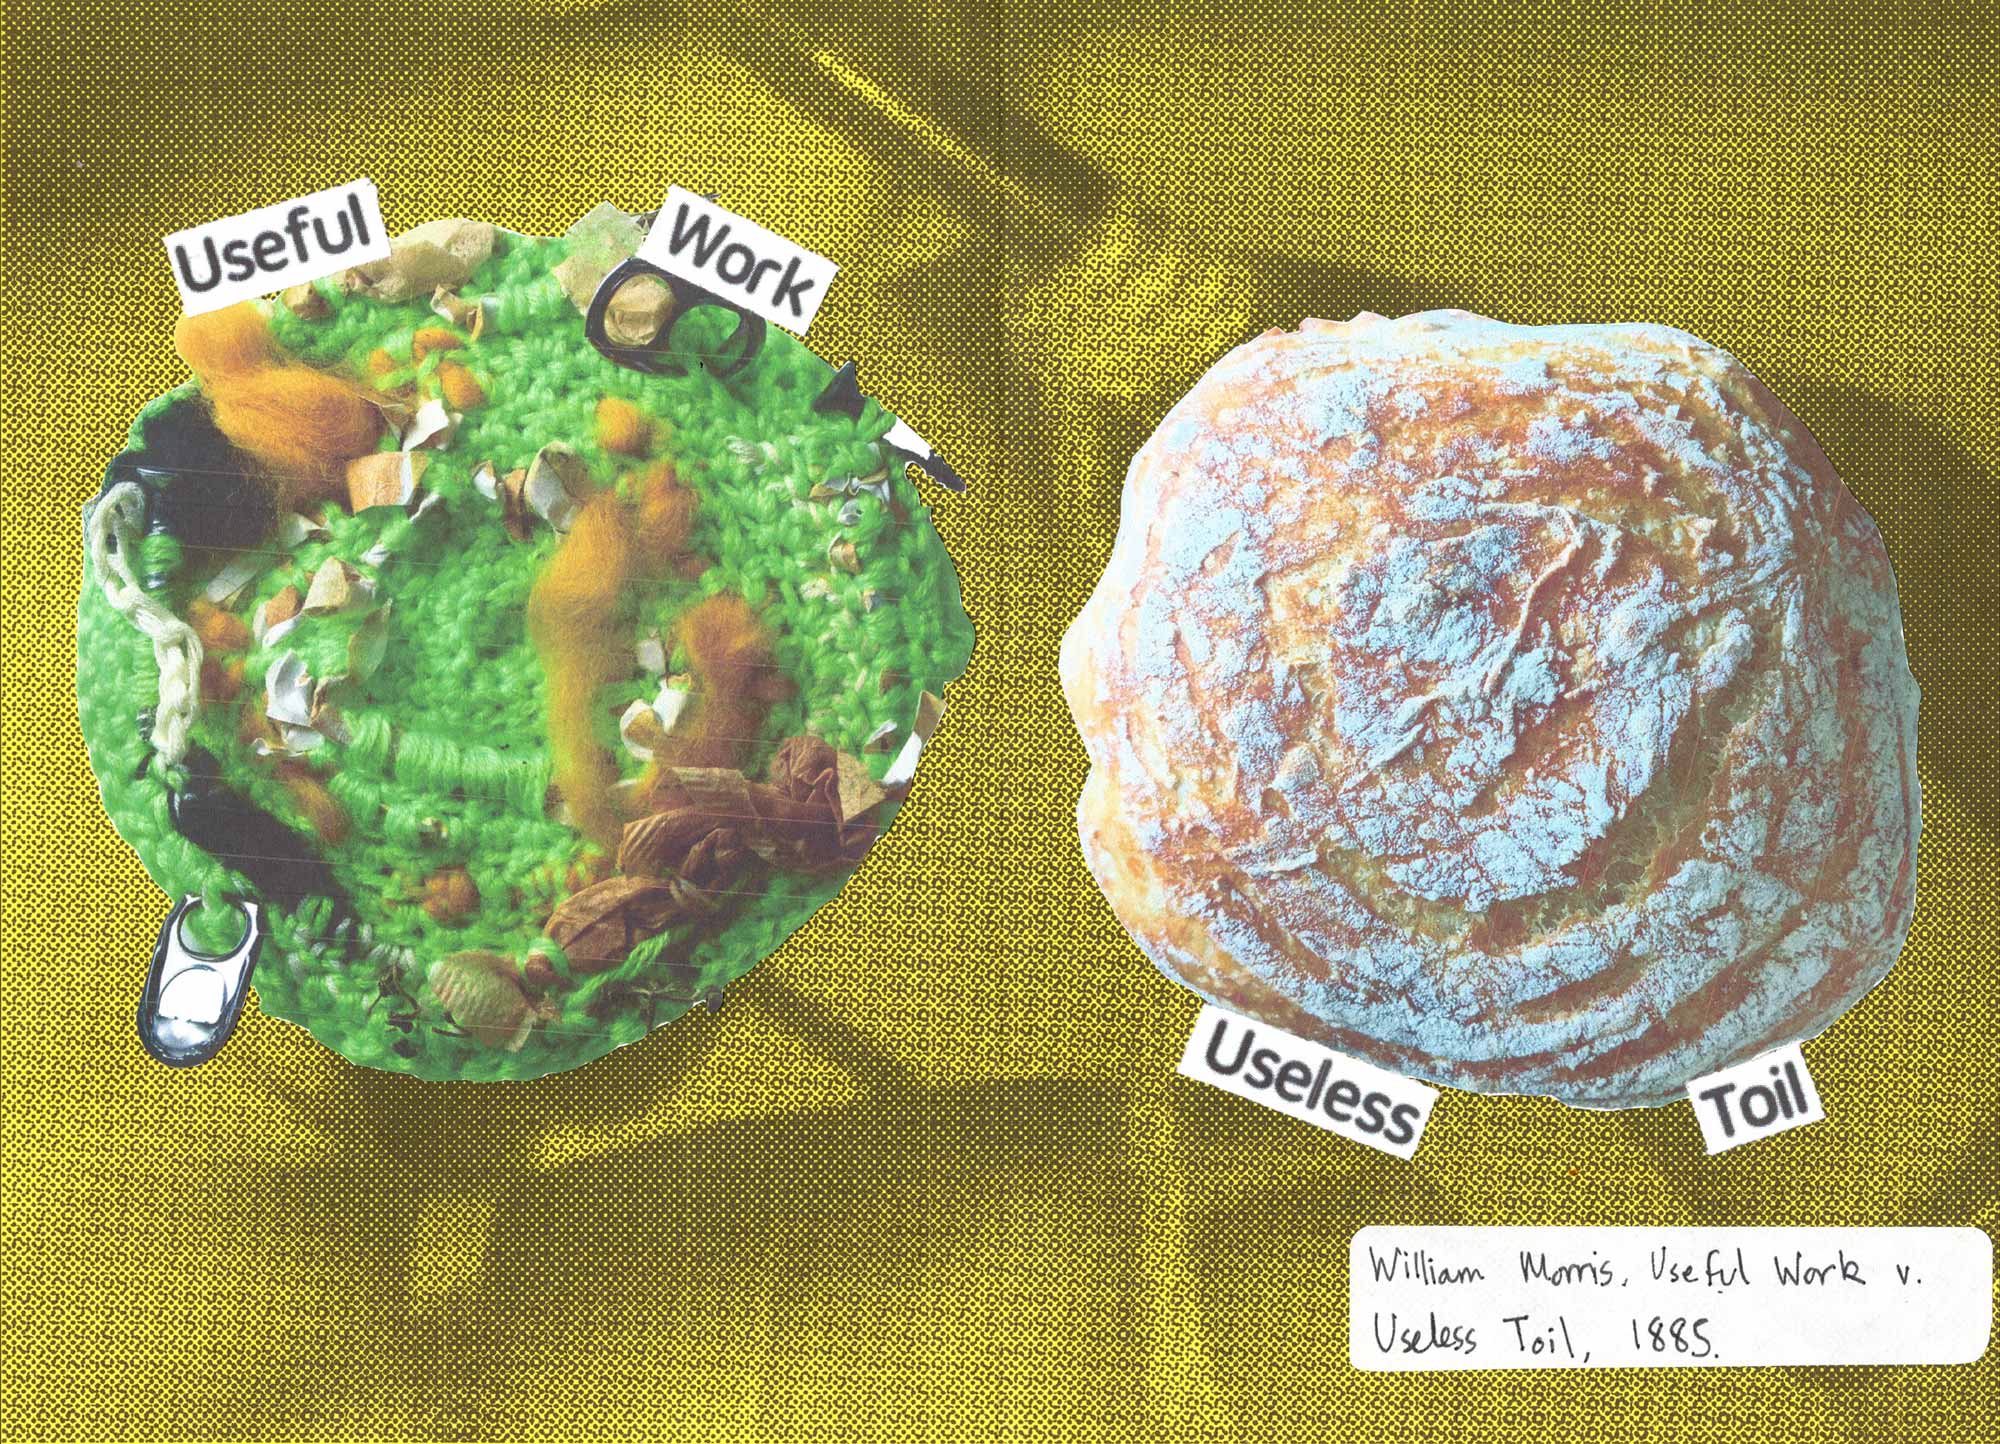 A yellow background with two circular objects. One is a knitted piece of fabric with ring pulls stitched into it. The words Useful Work are collaged on top. The other circular image shows a loaf of sourdough bread. The words useless toil are collaged below.